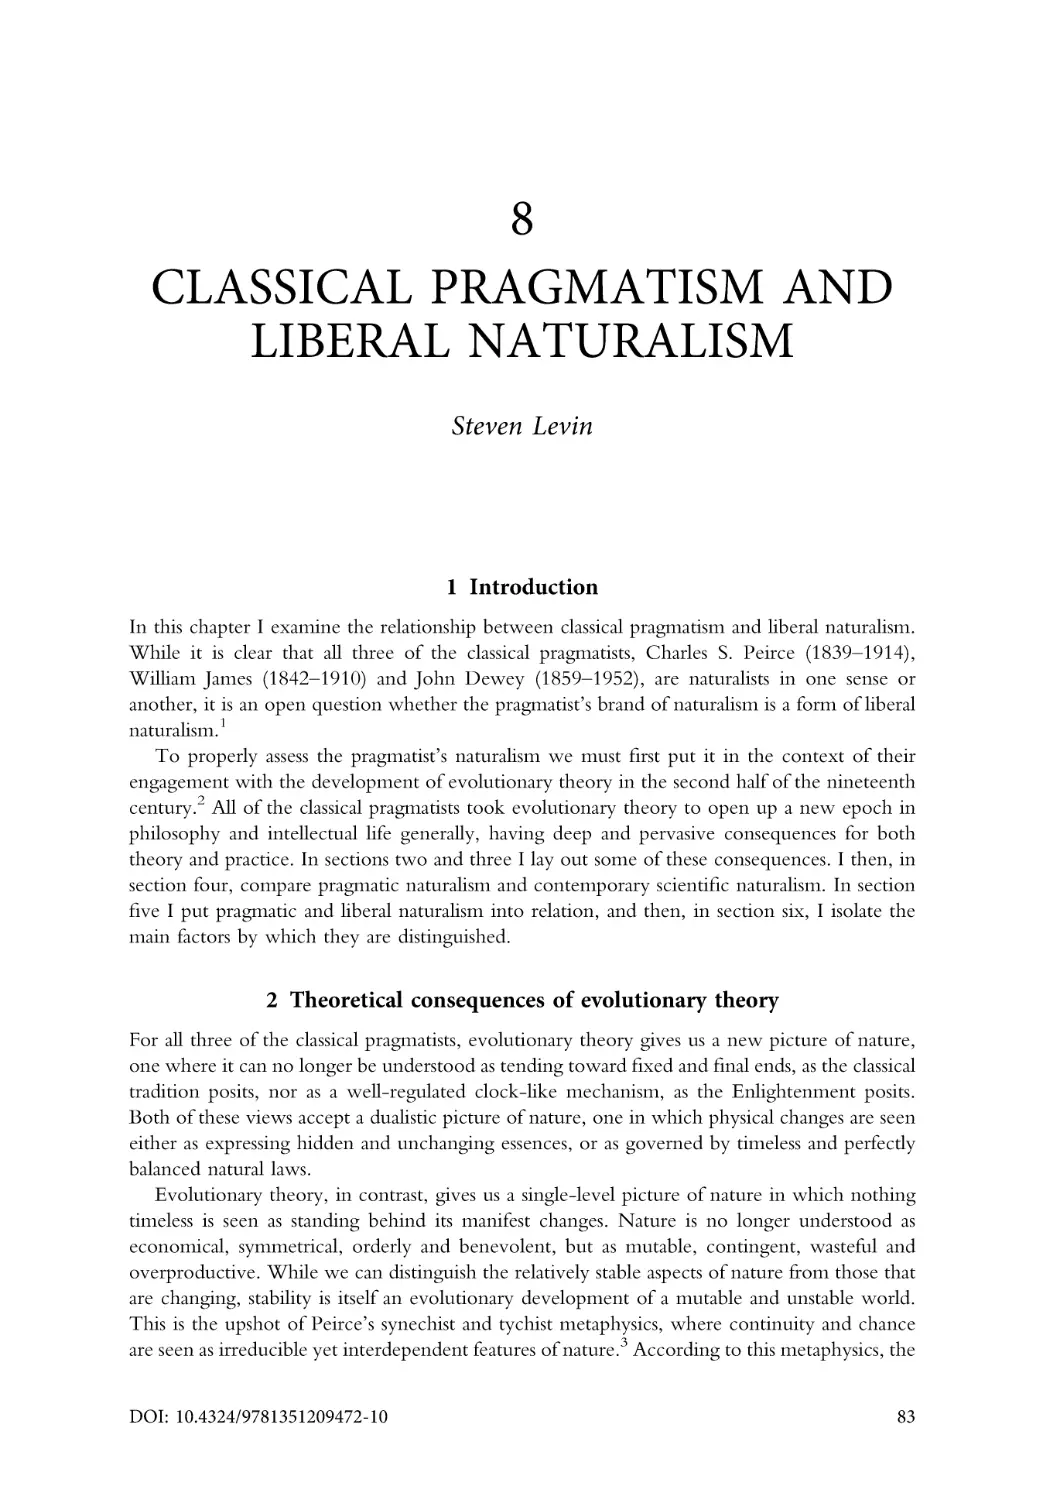 8. Classical pragmatism and liberal naturalism
1. Introduction
2. Theoretical consequences of evolutionary theory